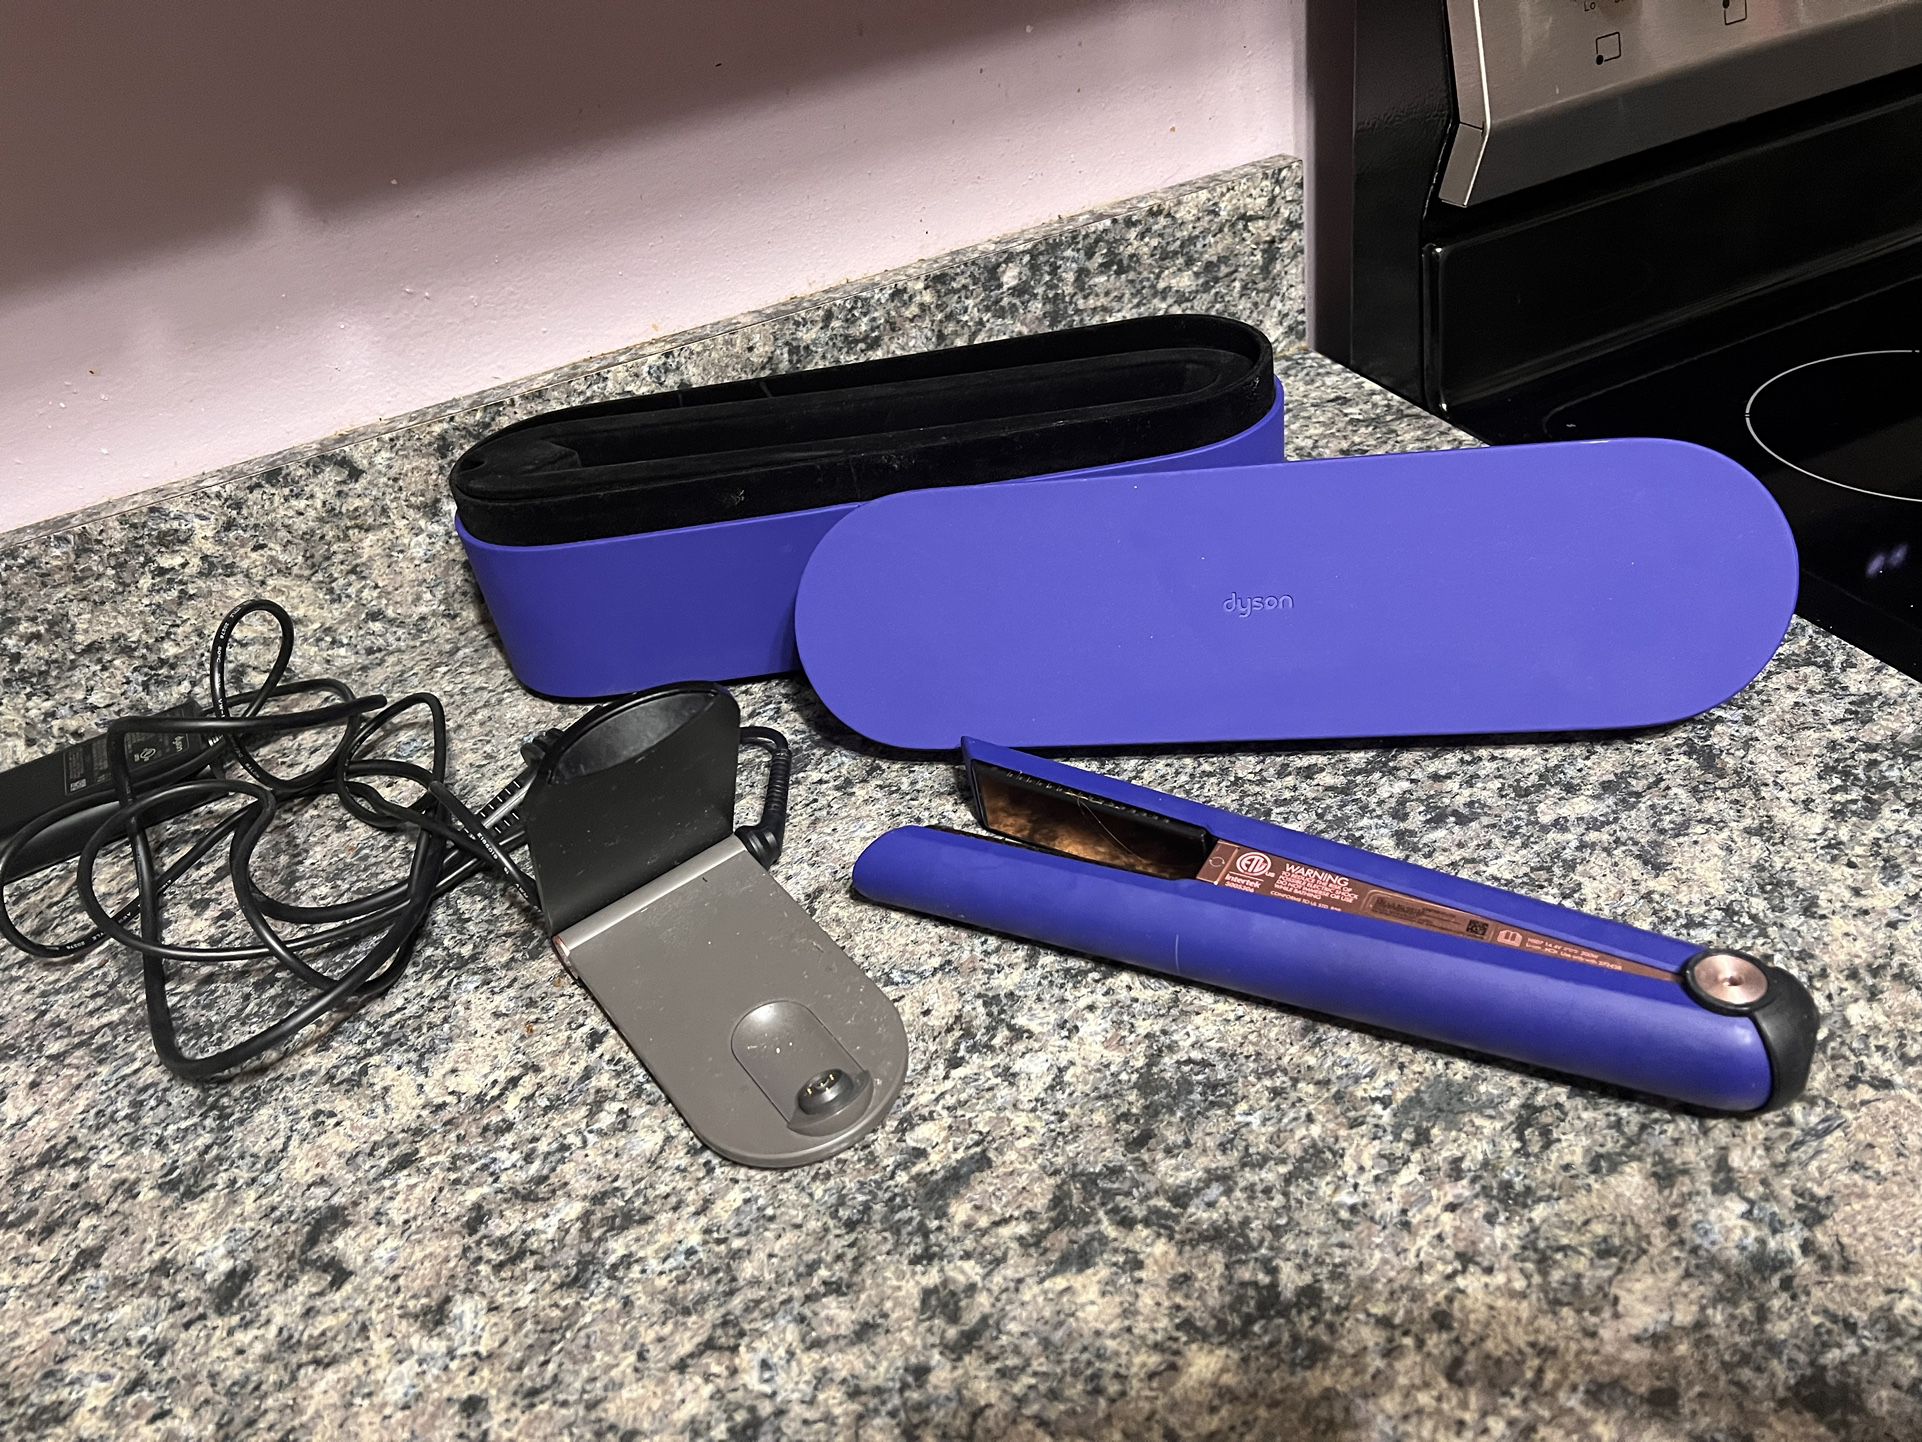 DYSON SPECIAL EDITION FLAT IRON / Straightener 